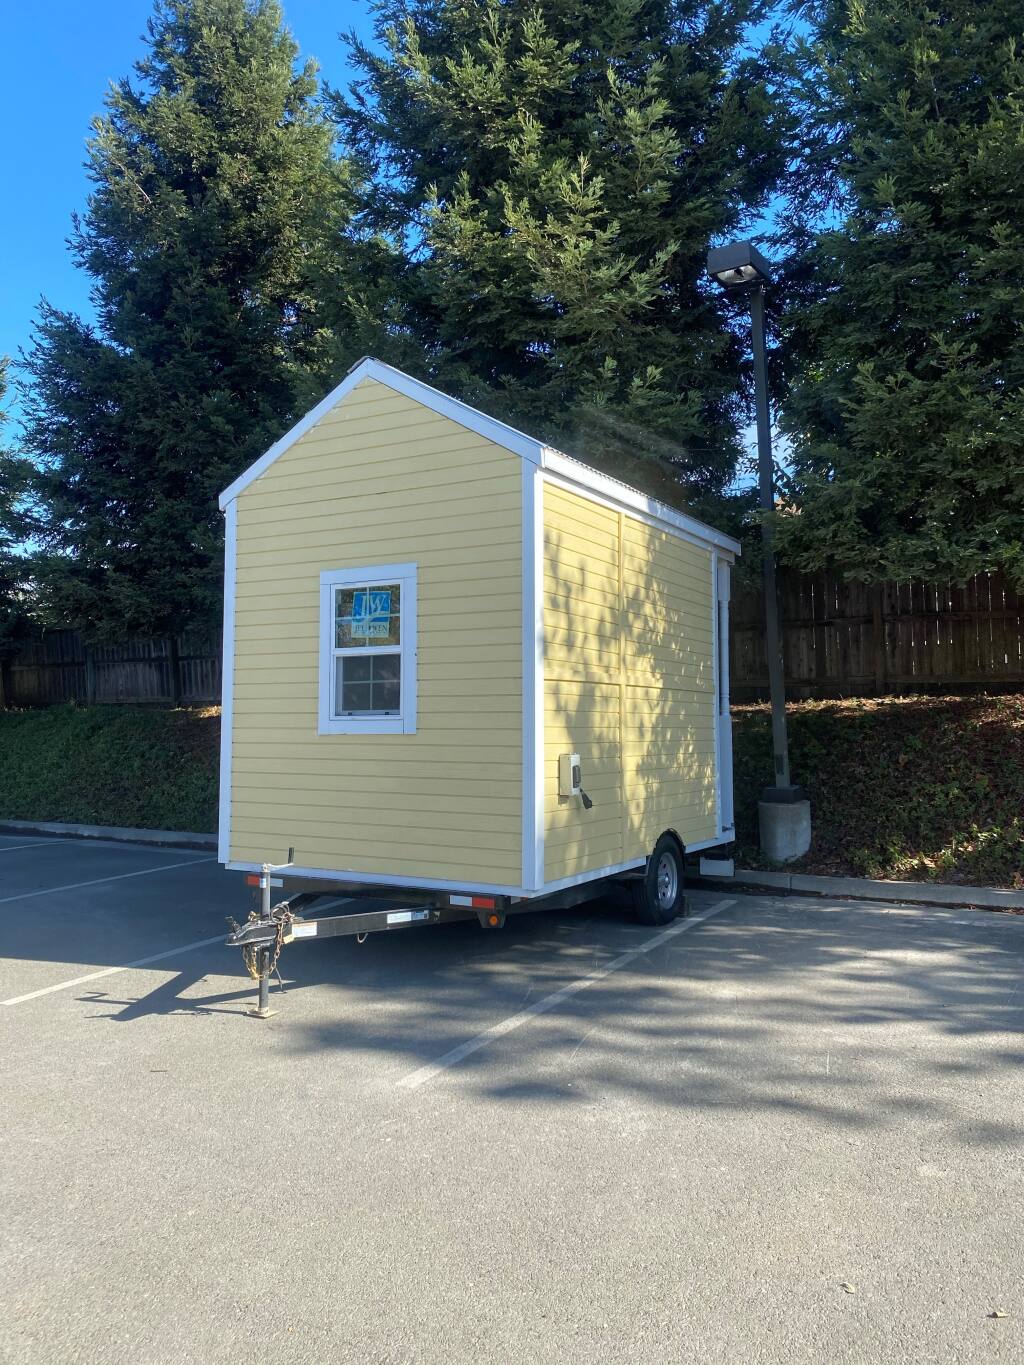 One of four tiny homes built by a cohort of high school students with the North Bay Construction Corps, which was being sold to raise money for future students, was stolen from a west Santa Rosa parking lot Jan. 15, 2021. (Kathy Goodacre)